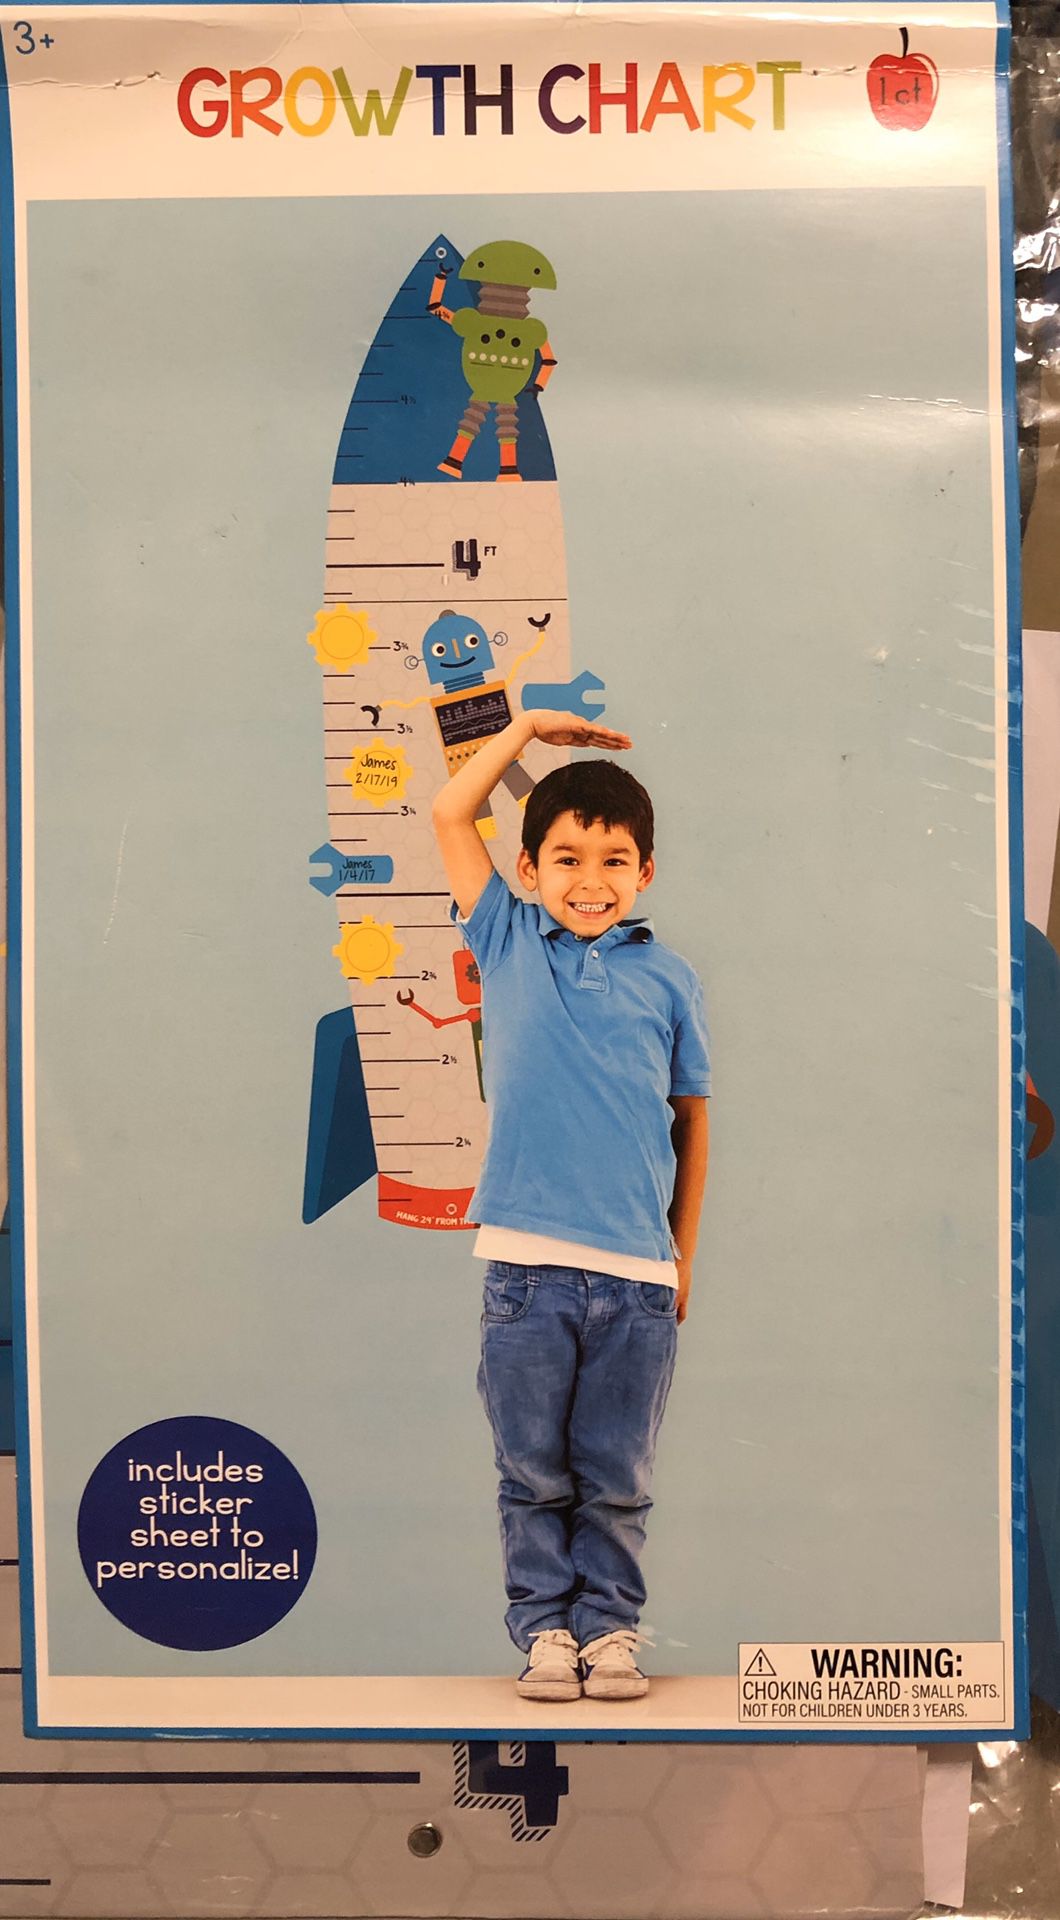 SPECIAL SALE: 2 Growth Charts with Sticker Sheet to Personalize